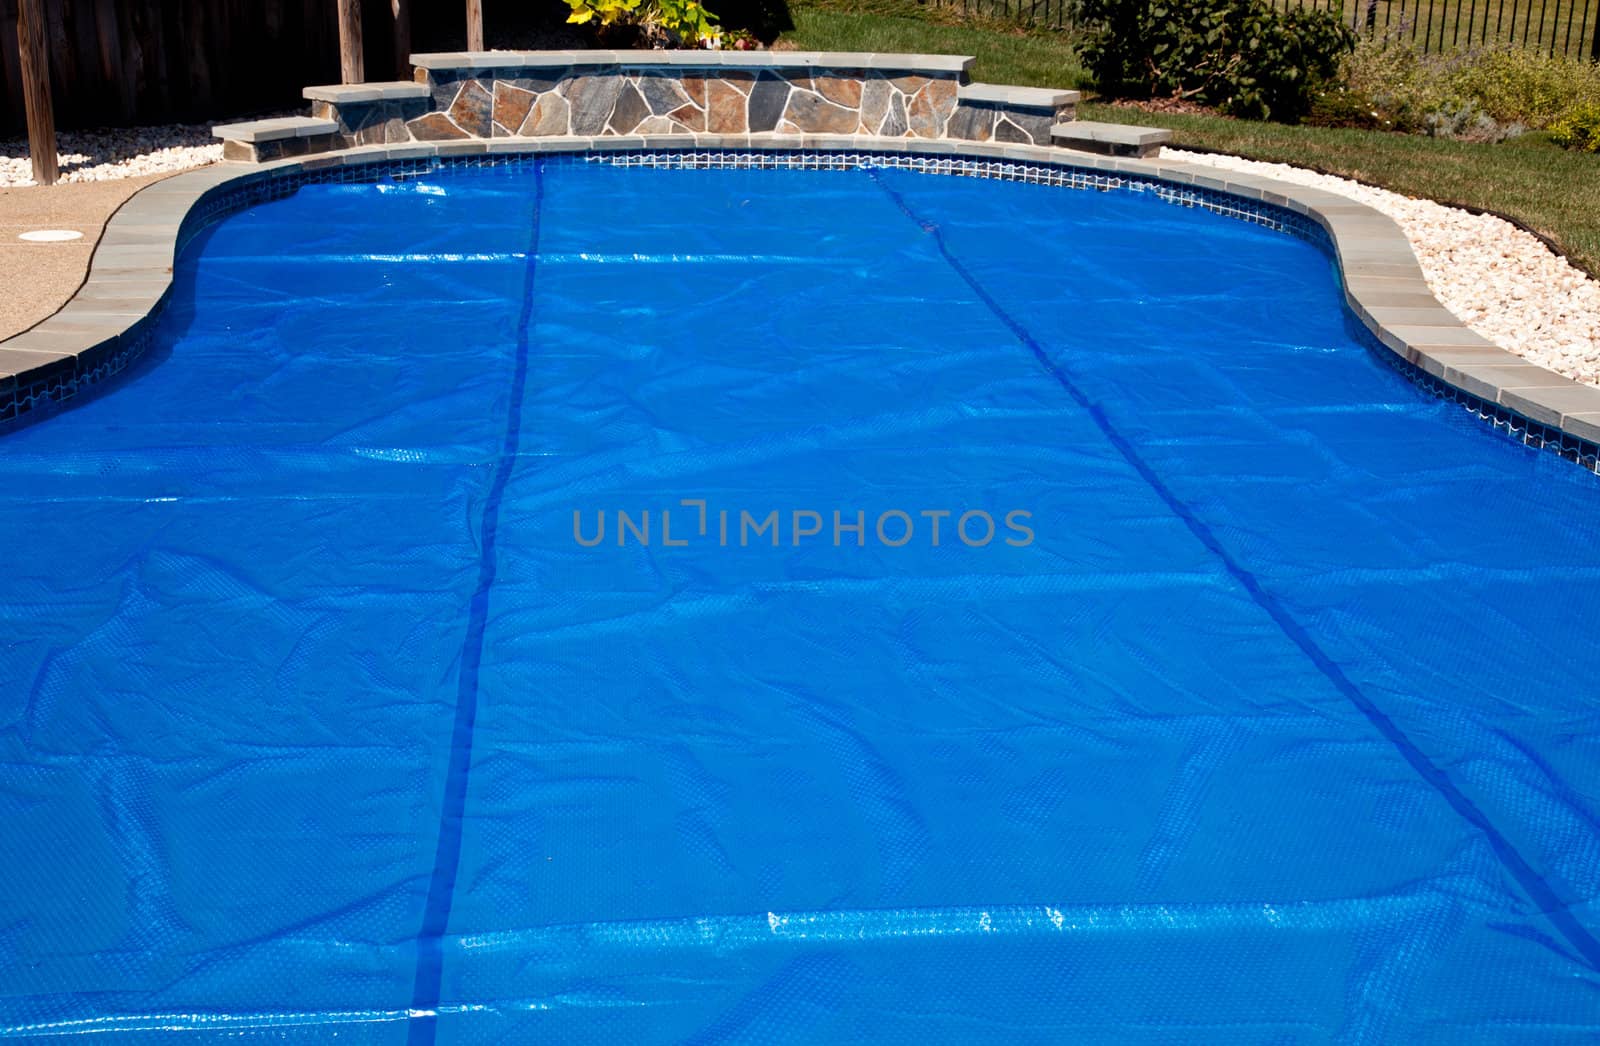 Bubble wrap like pool cover pulled over a swimming pool to keep in heat overnight